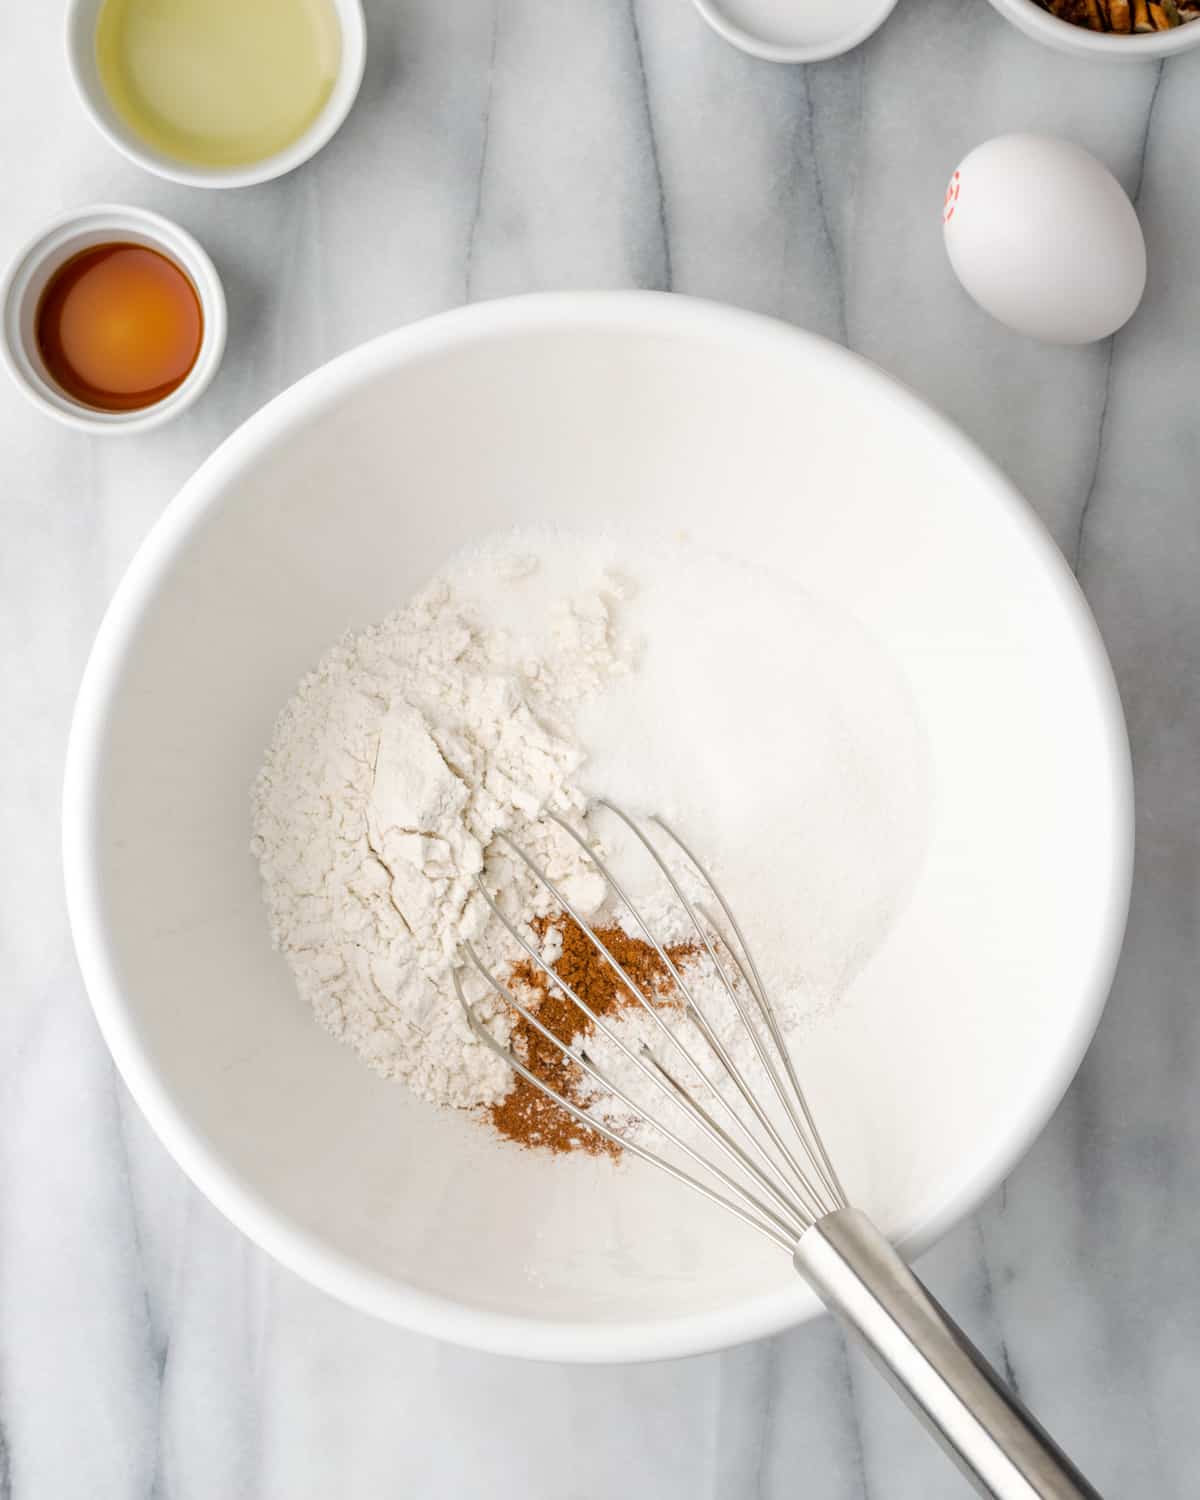 Gluten free flour, baking powder, cinnamon, nutmeg, salt and sugar being whisked together in a large white bowl.